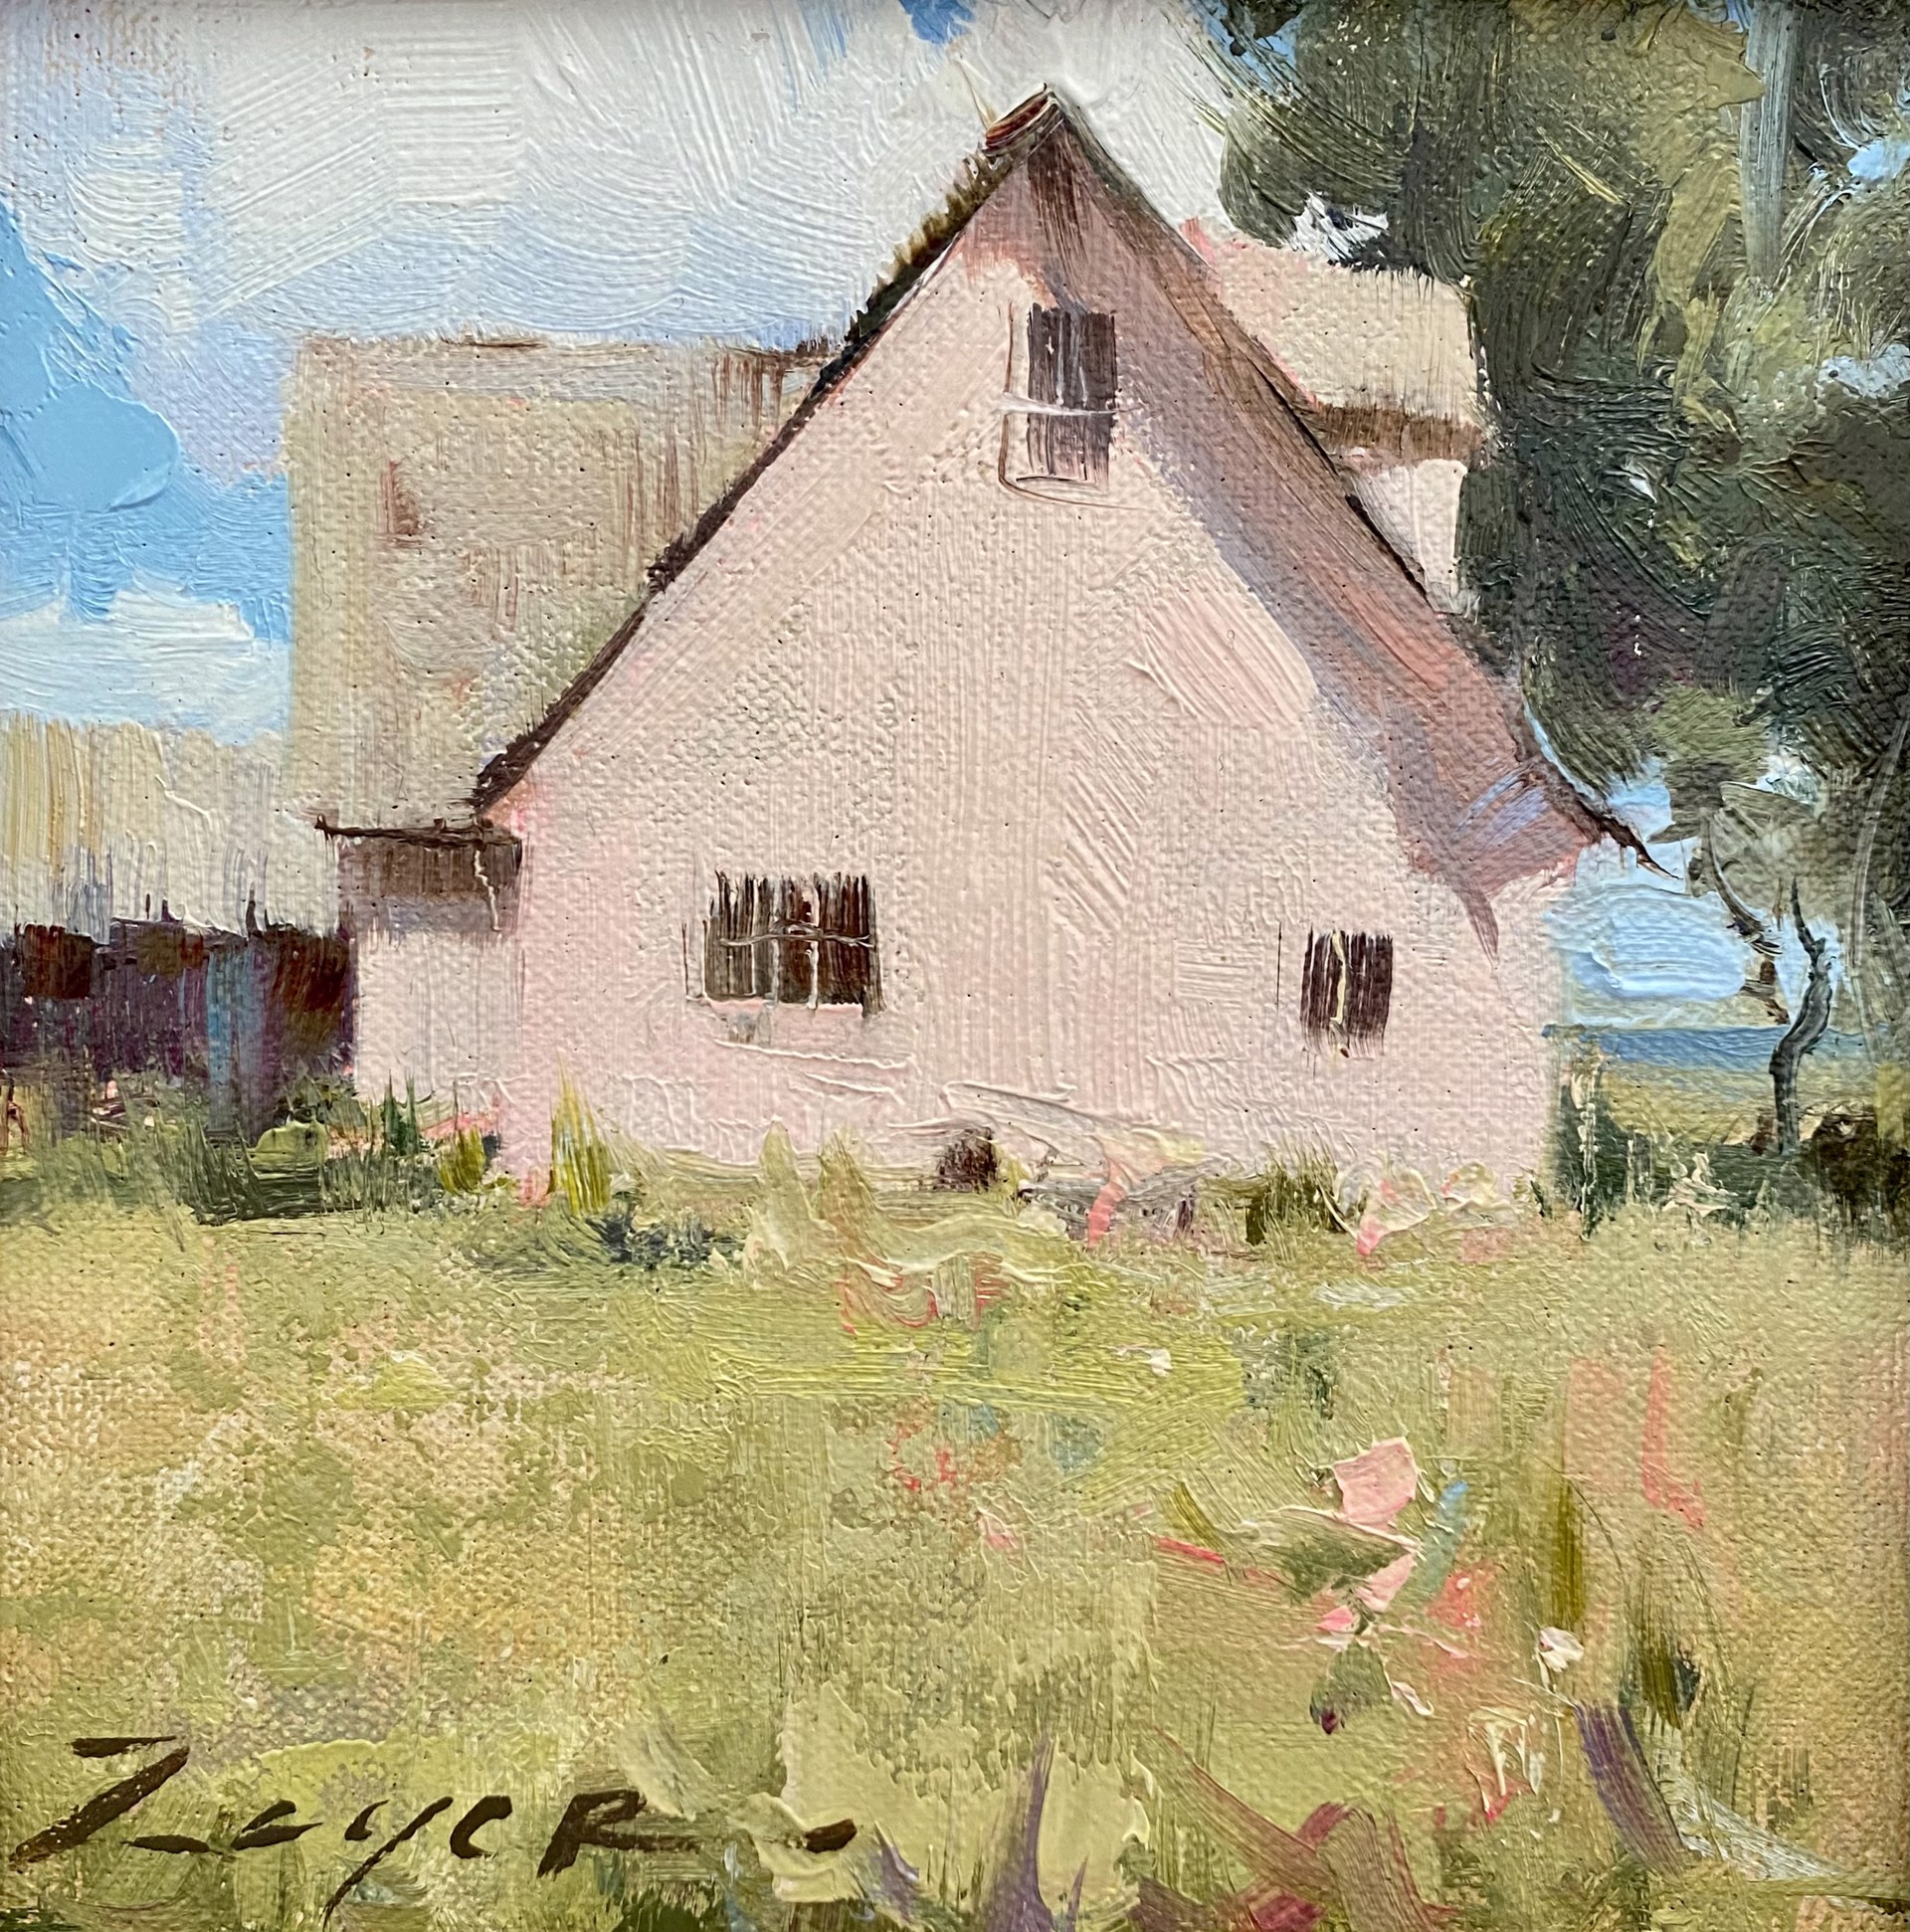 The Little Pink House by Allie Zeyer